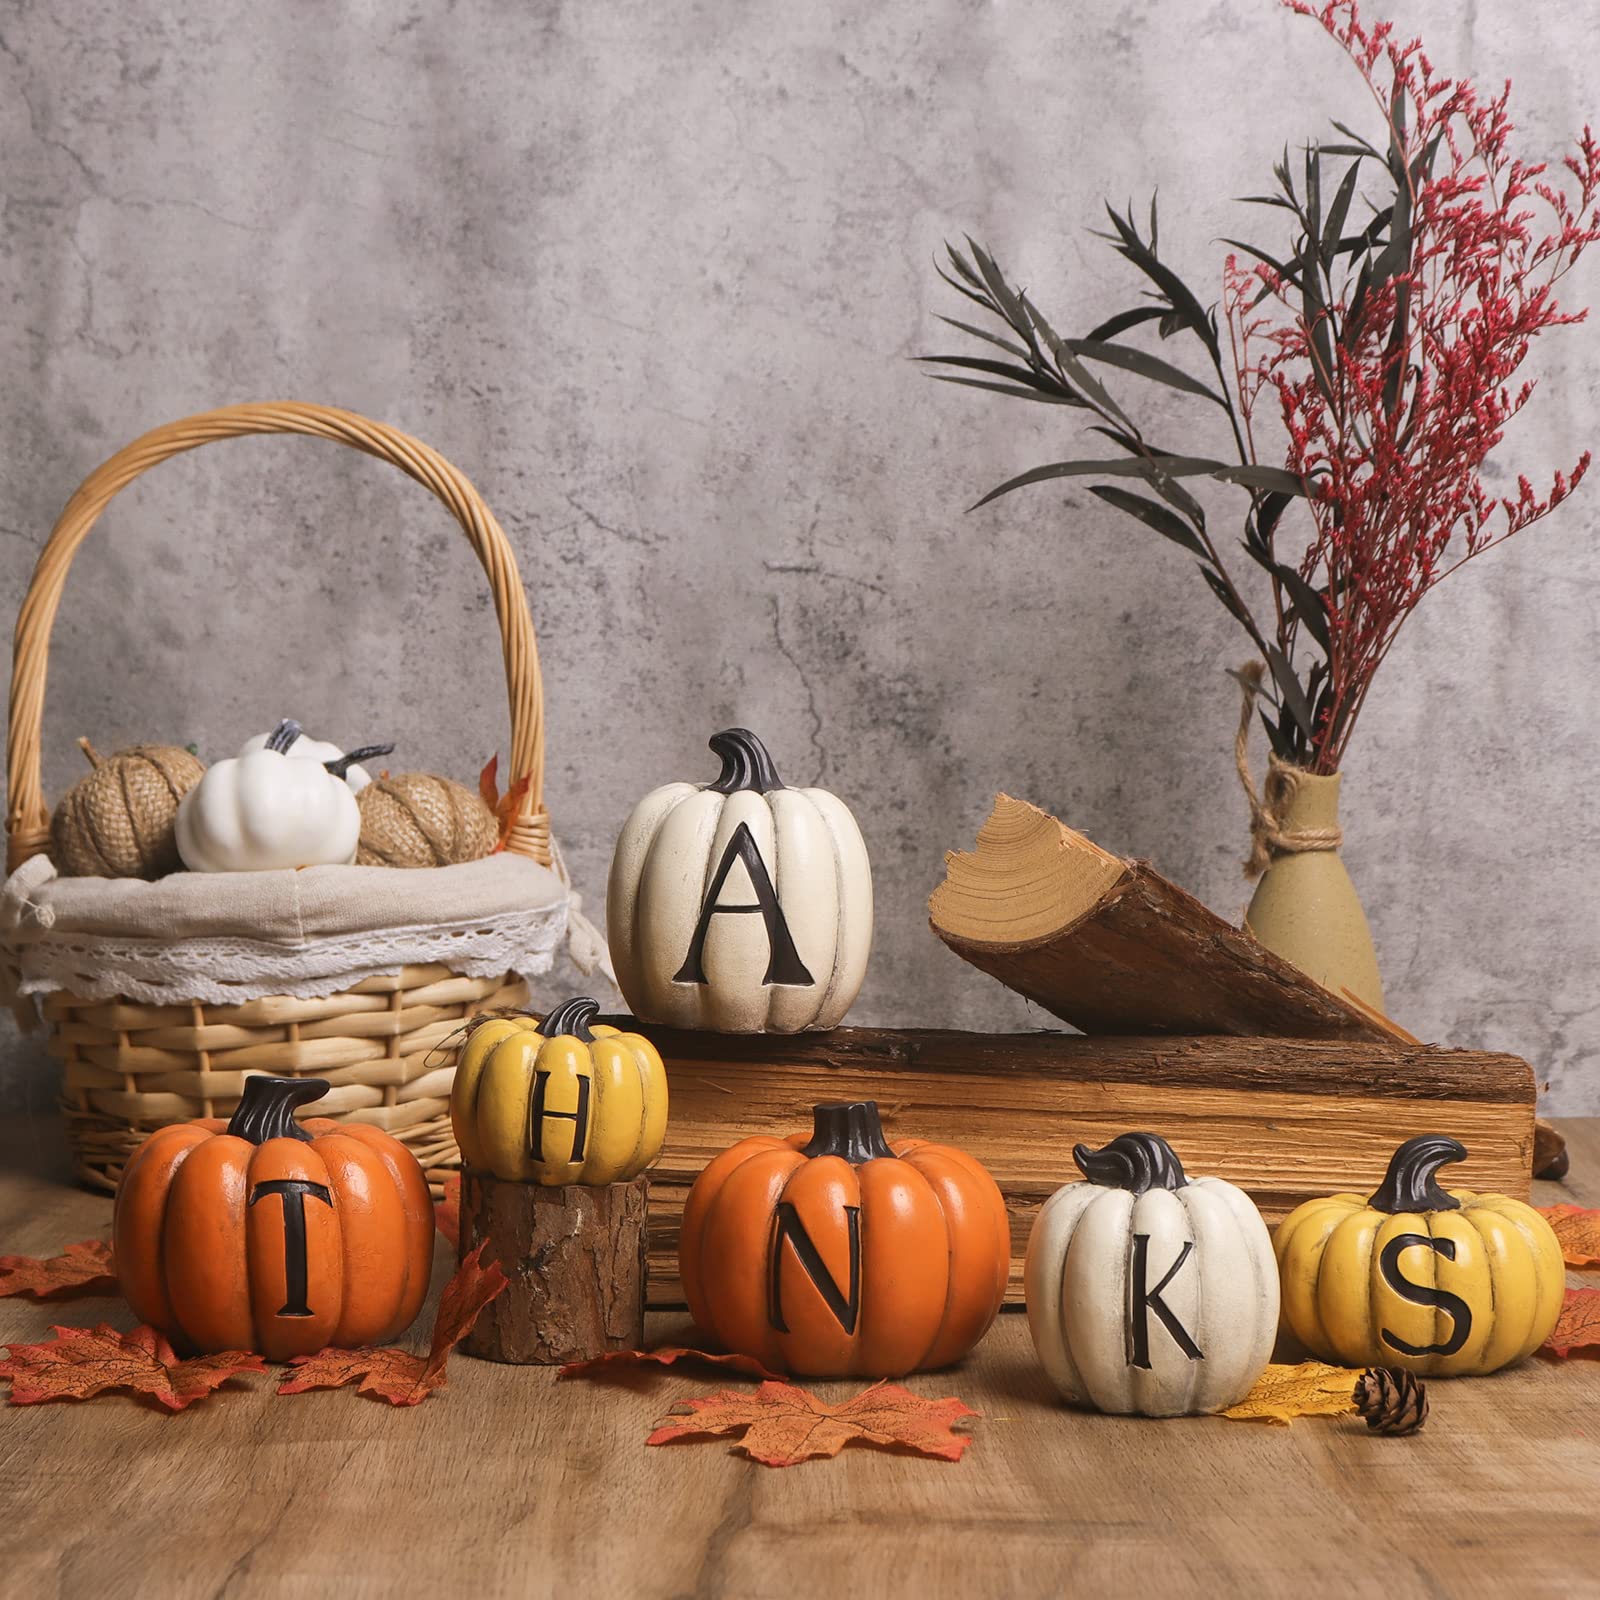 Thanksgiving Pumpkin Pictures Wallpapers